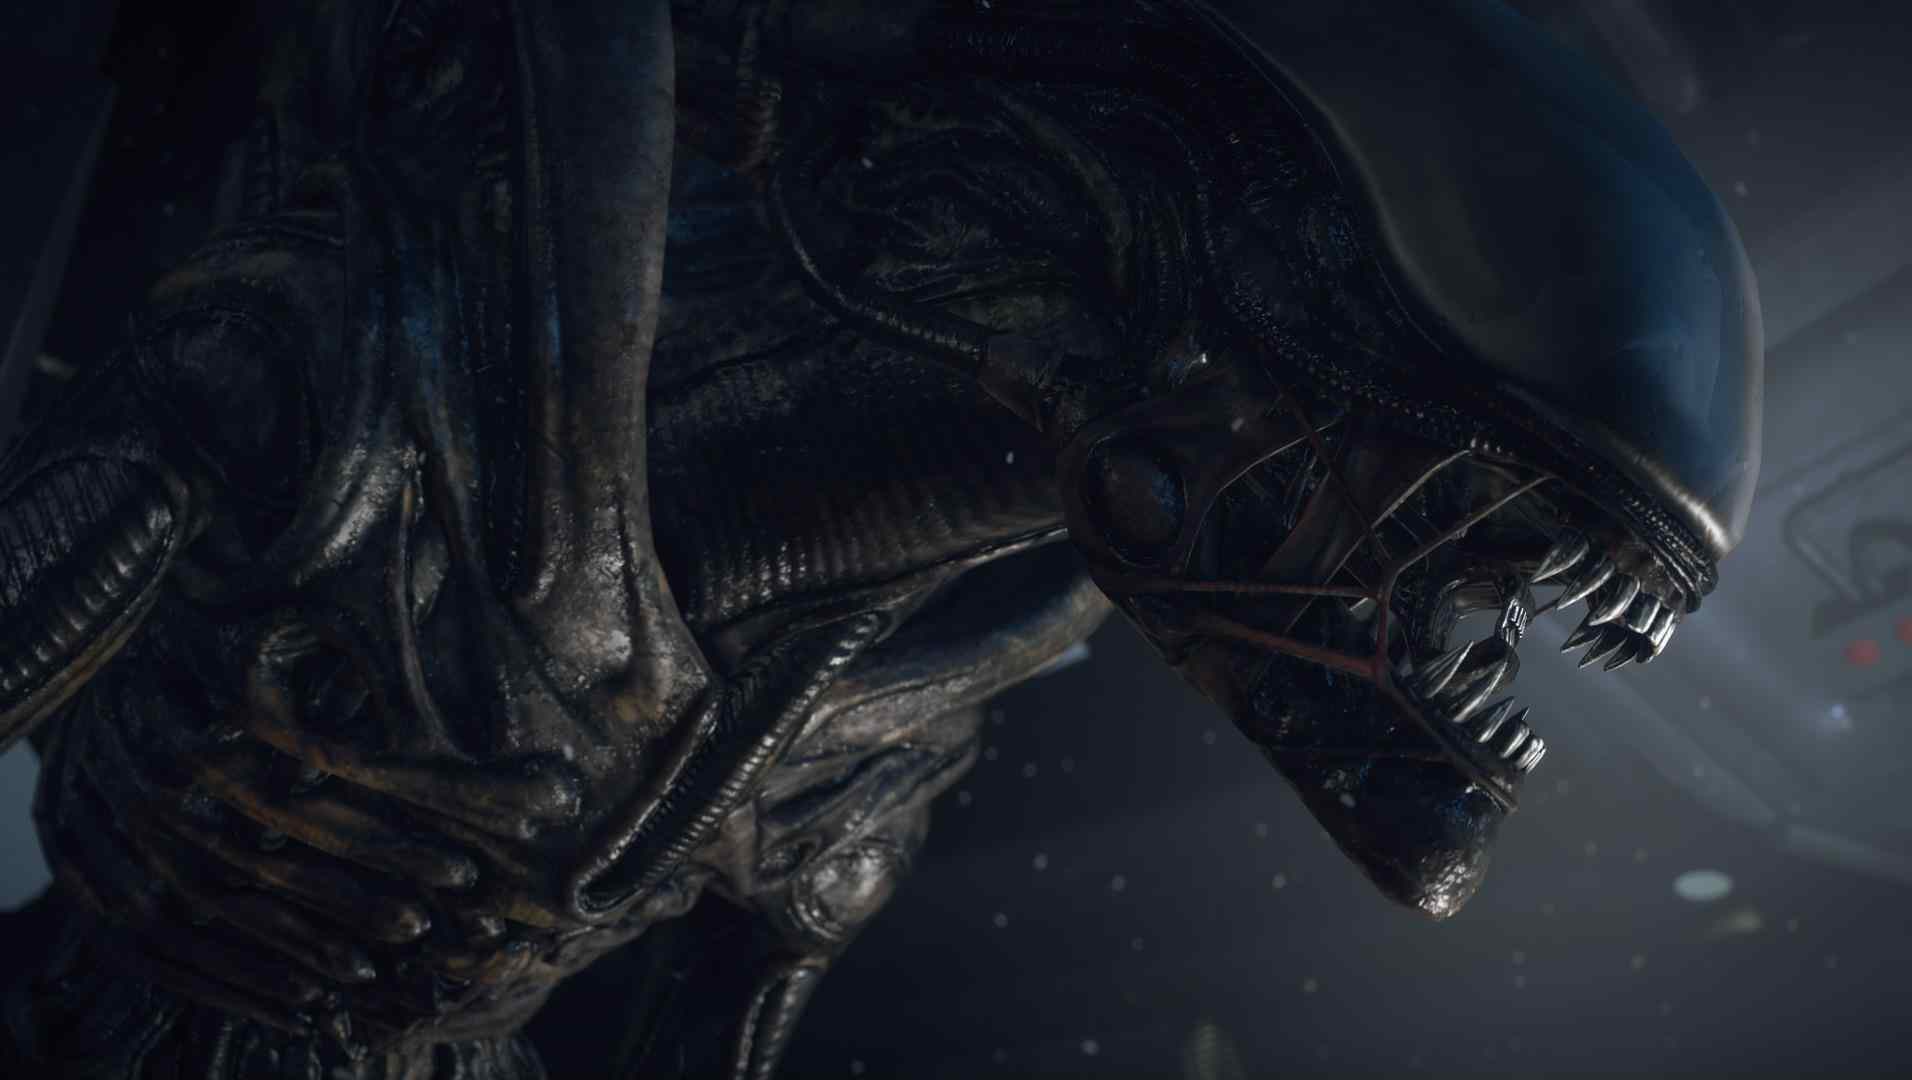 The Alien in the well known Alien franchise with the original starring Sigourney Weaver.